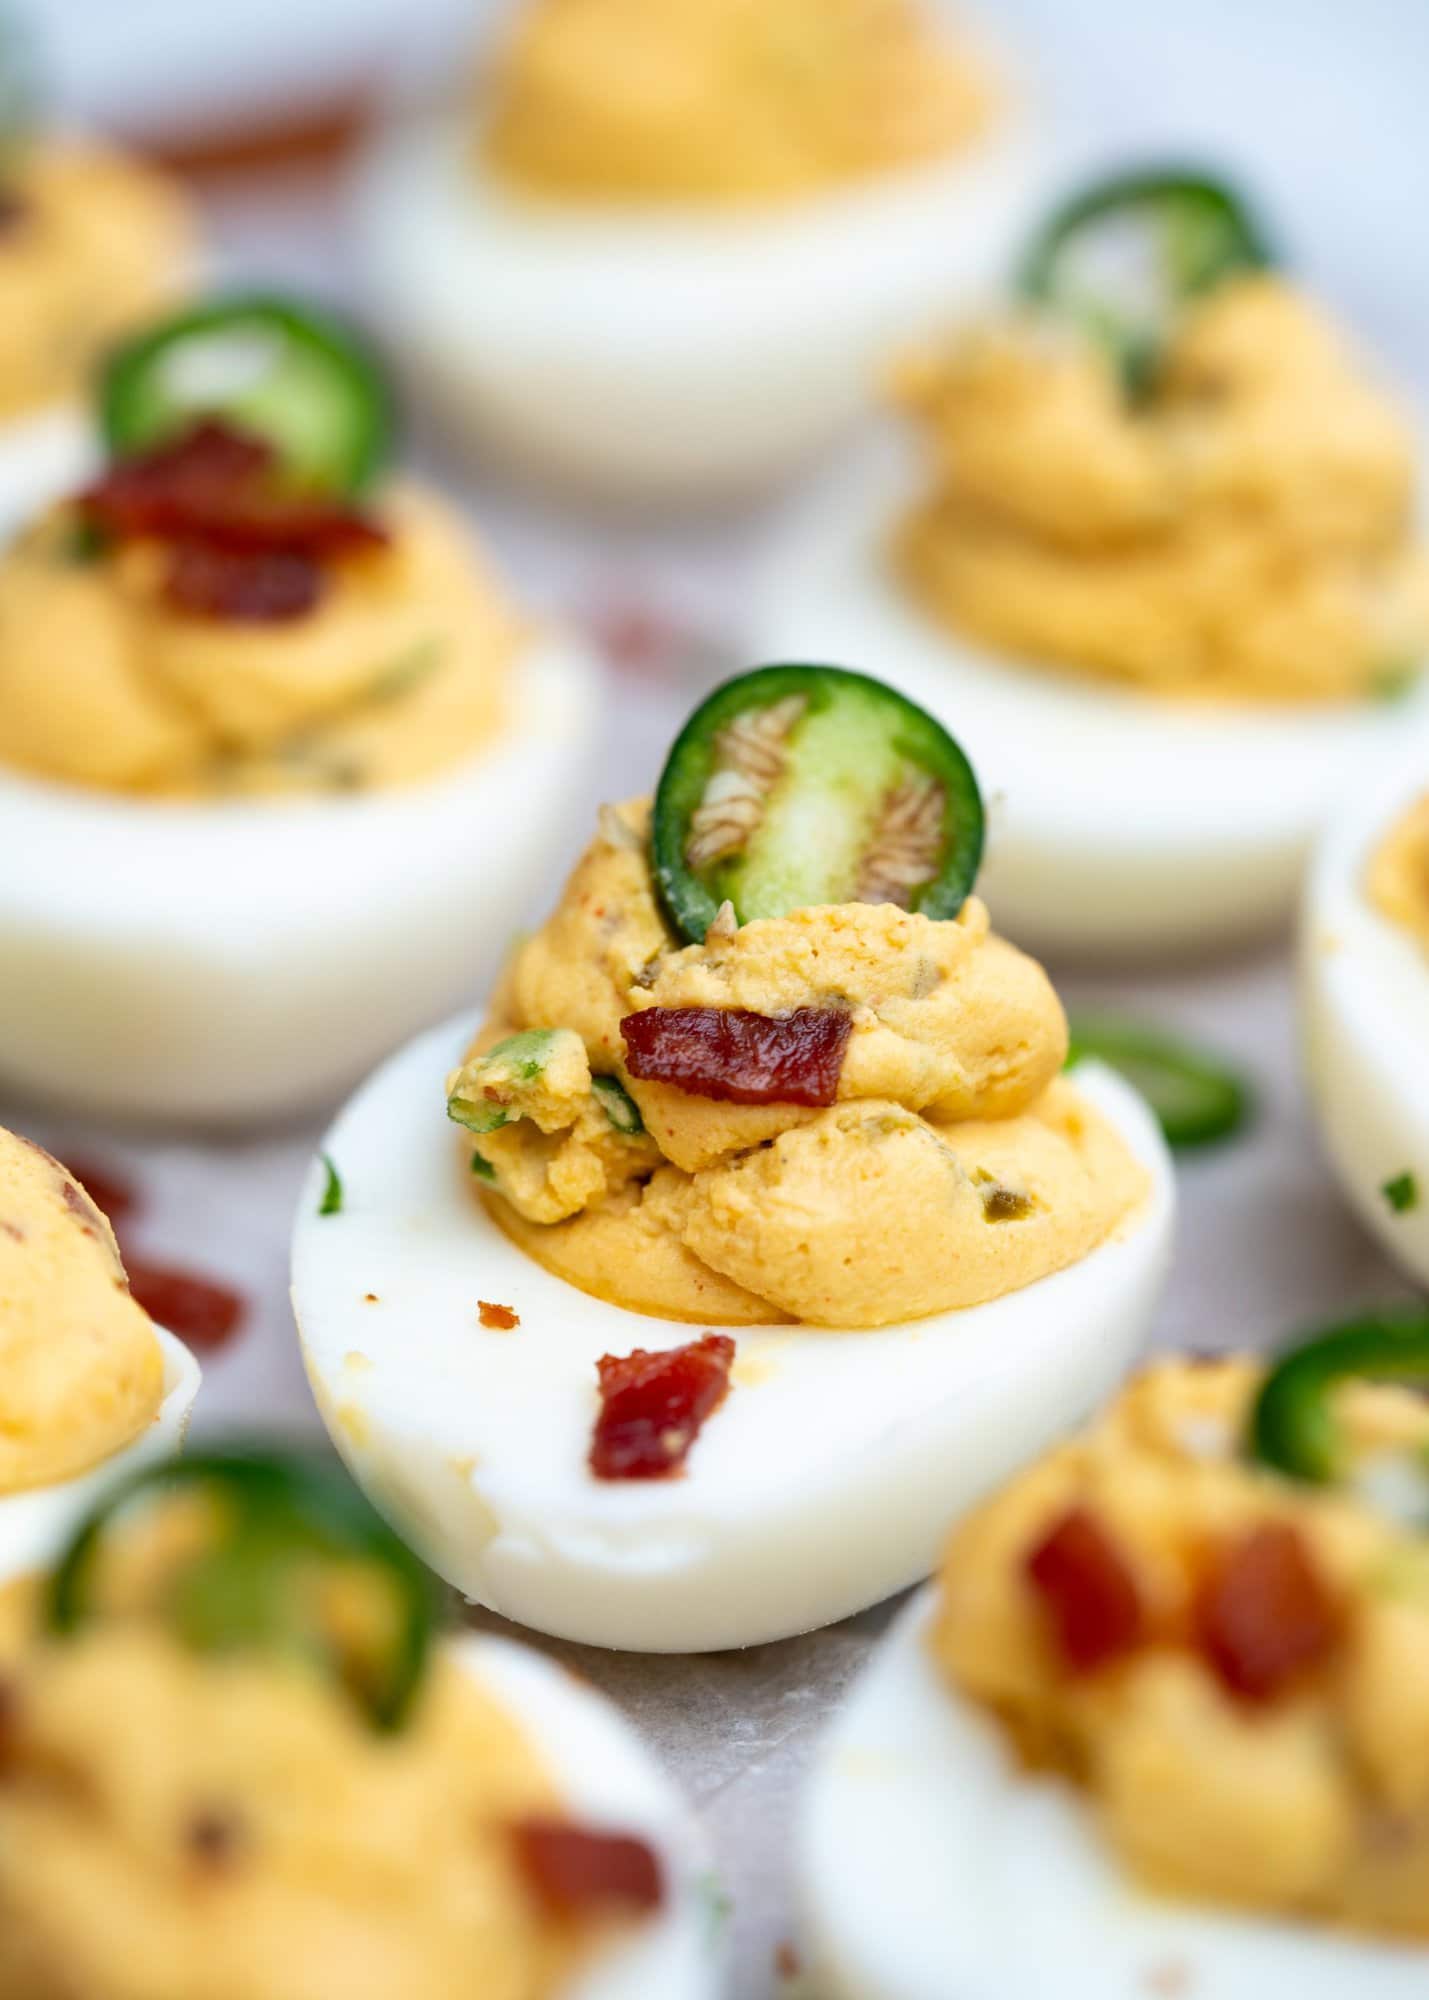 Jalapeno and bacon come together to make this classic appetizer more interesting. This variation has a fresh and spicy kick from fresh and pickled jalapenos, with the bacon adding saltiness and a layer of flavor.